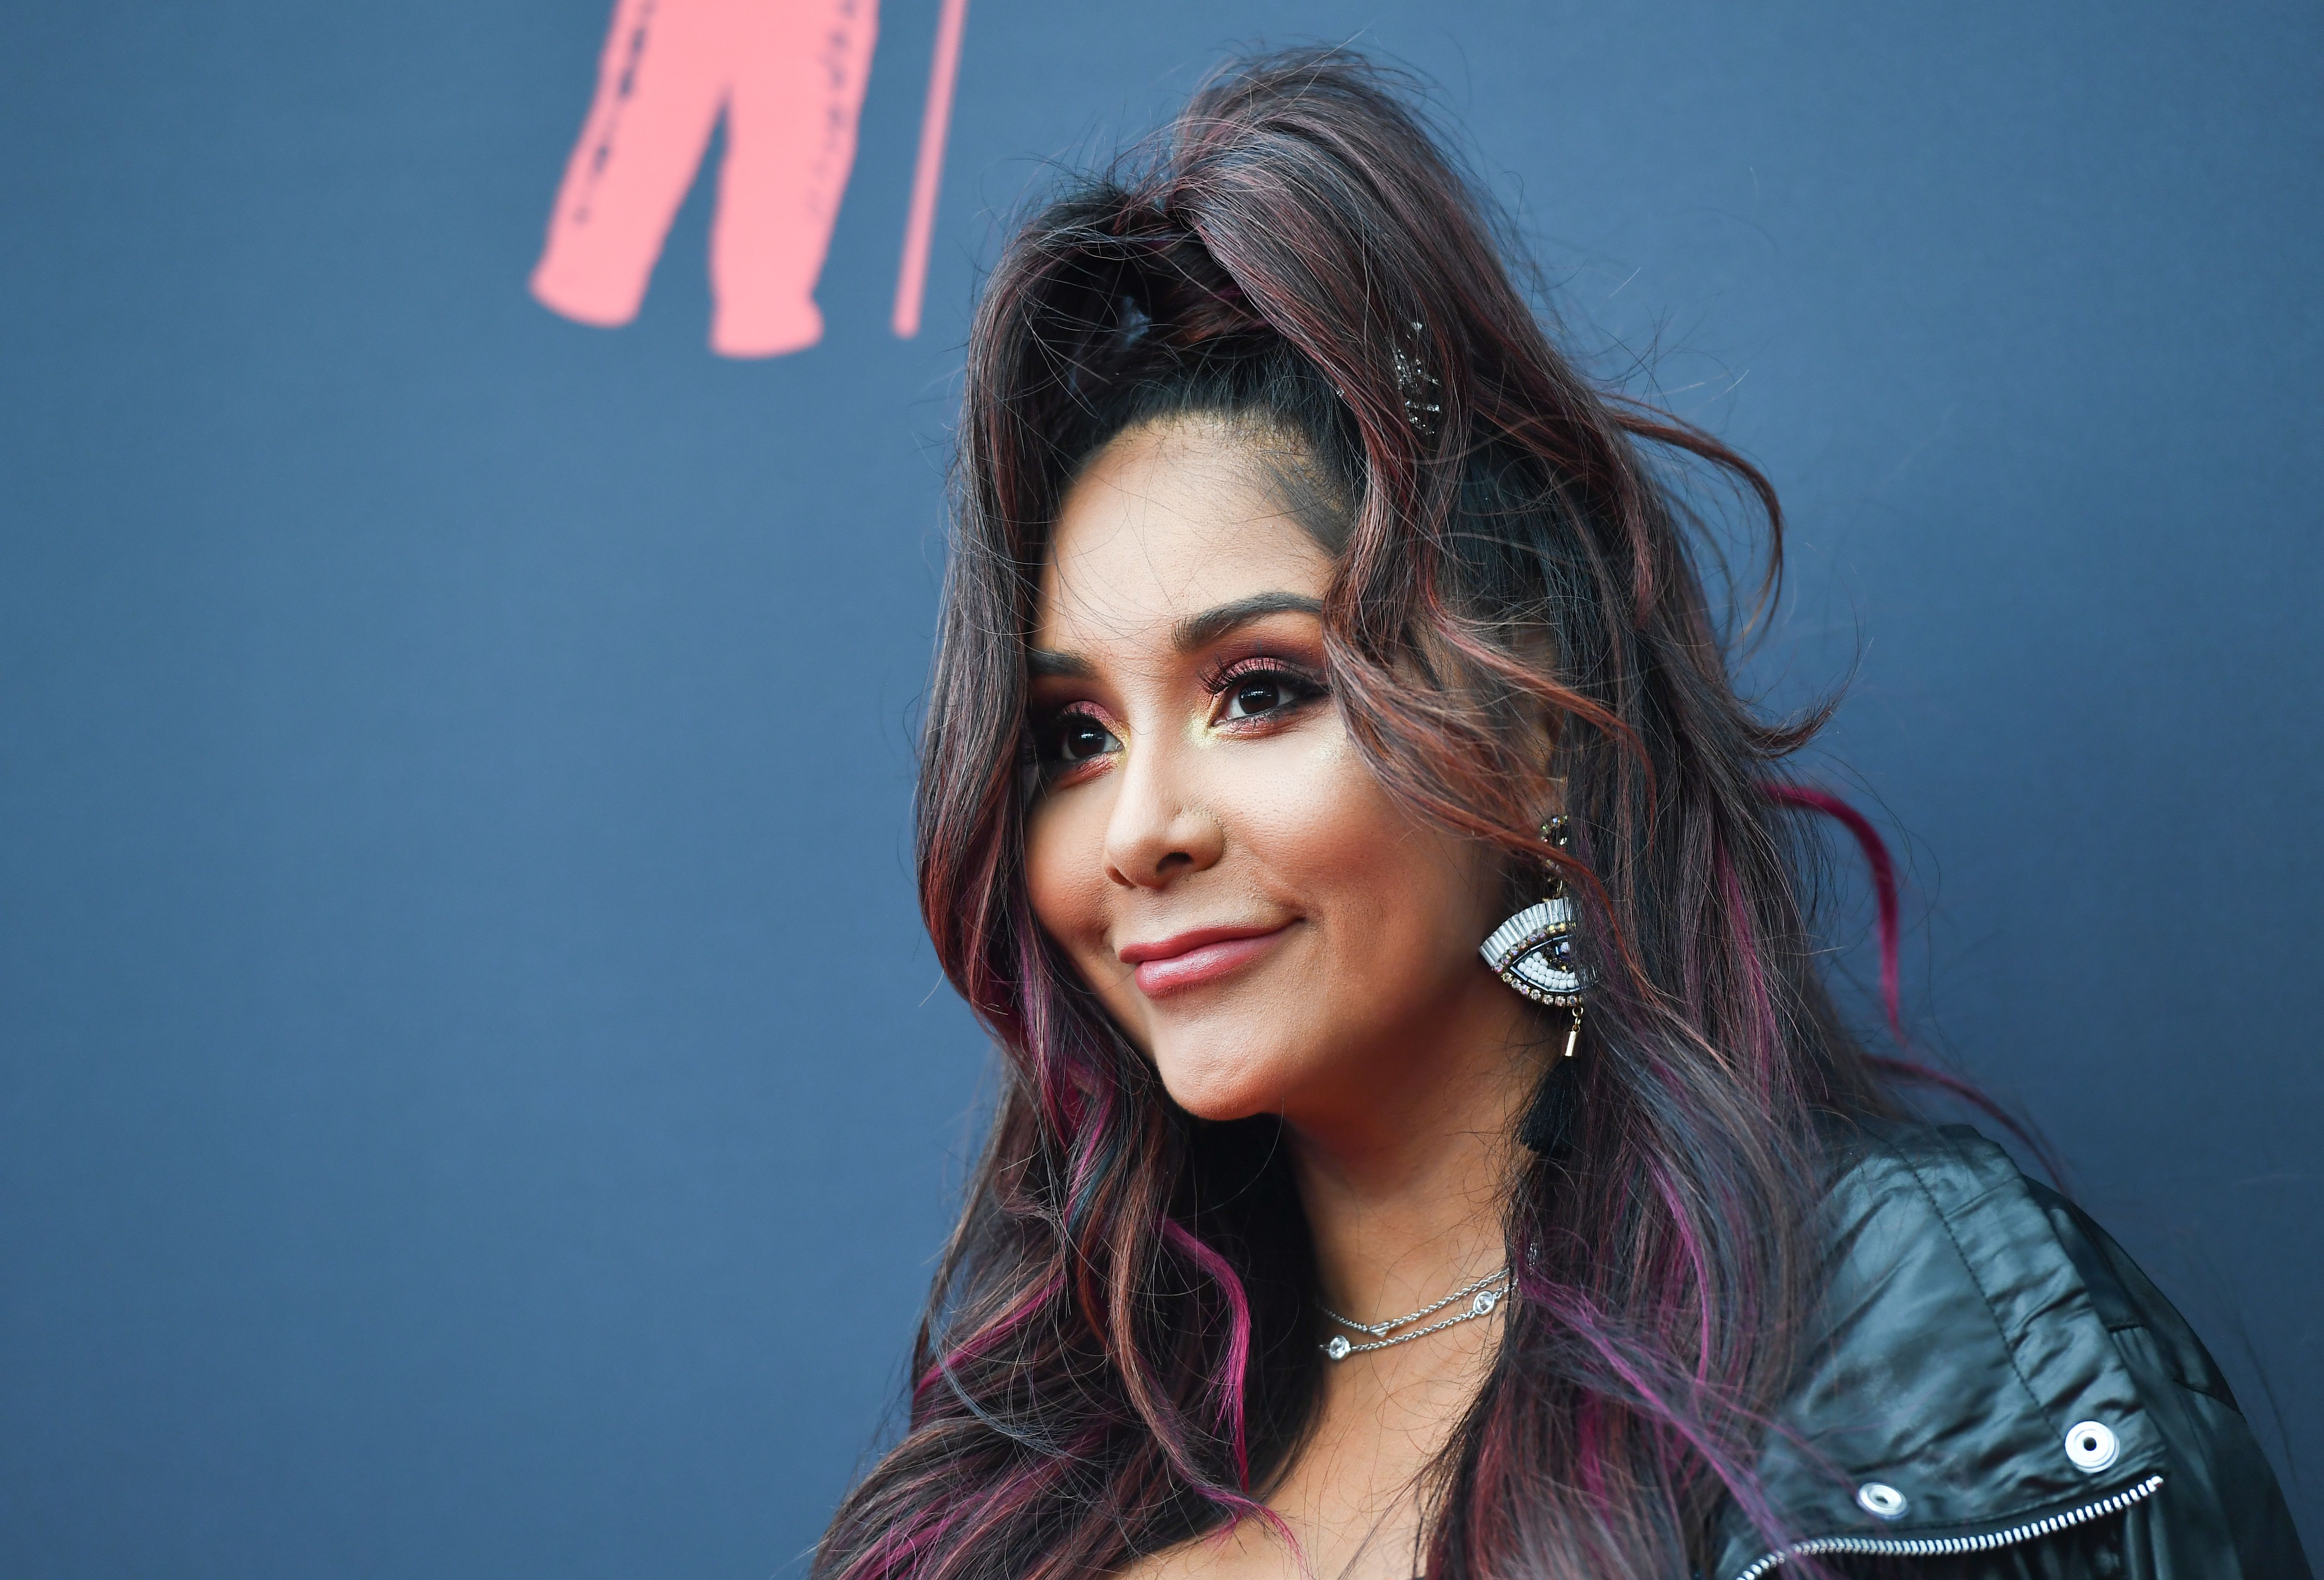 Nicole 'Snooki' Polizzi on the red carpet of the 2019 MTV Video Music Awards